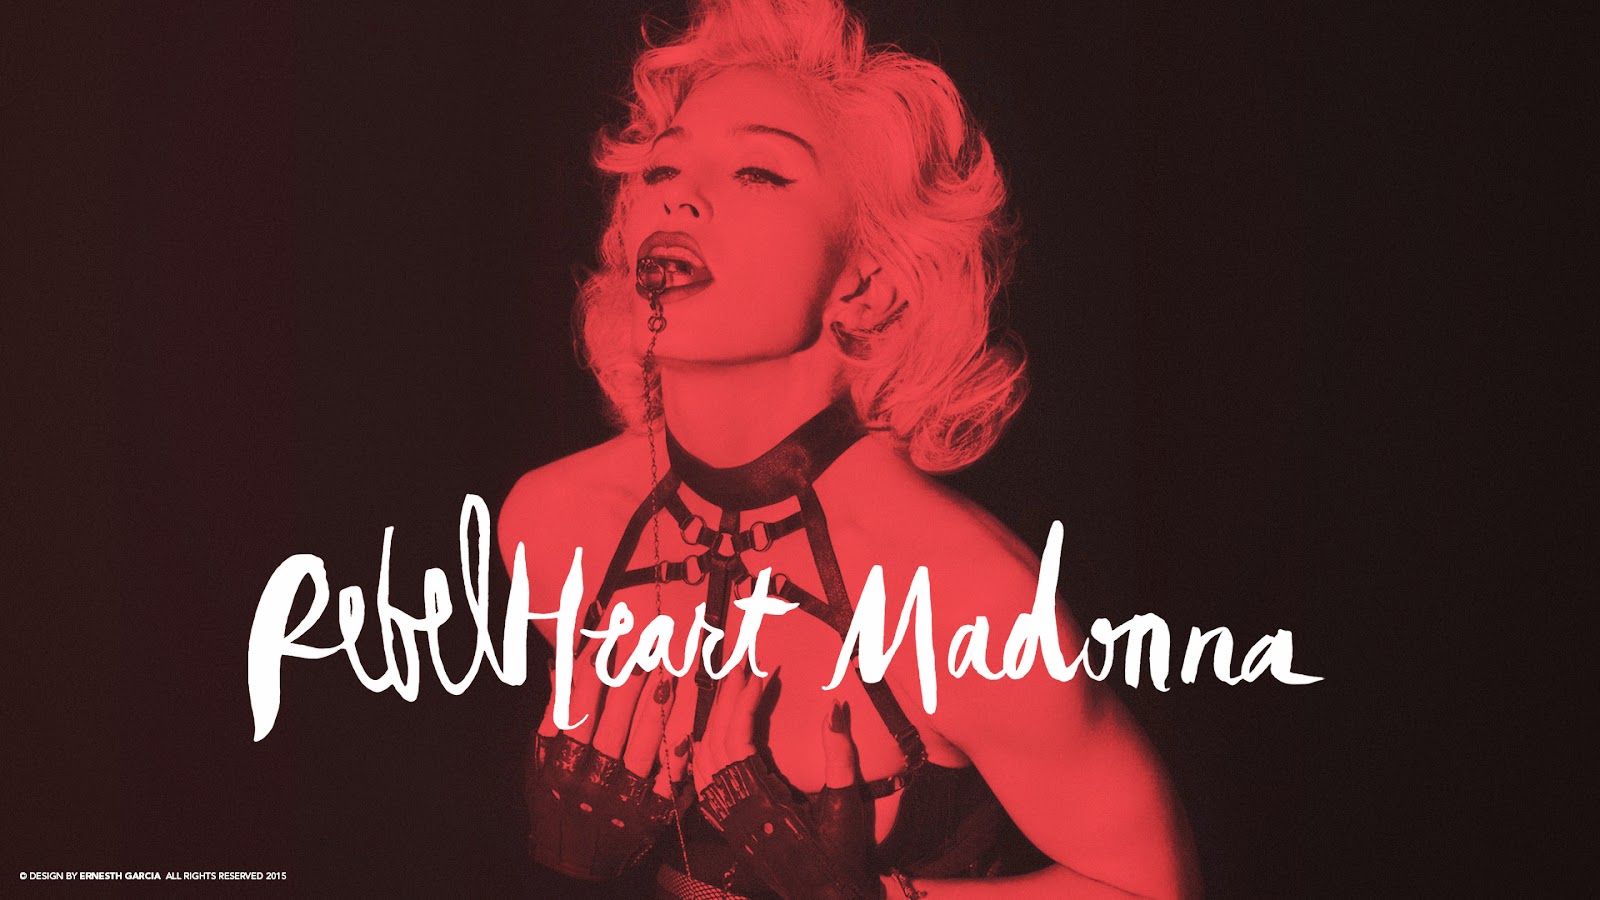 Madonna Fanmade Covers Rebel Heart Wallpaper